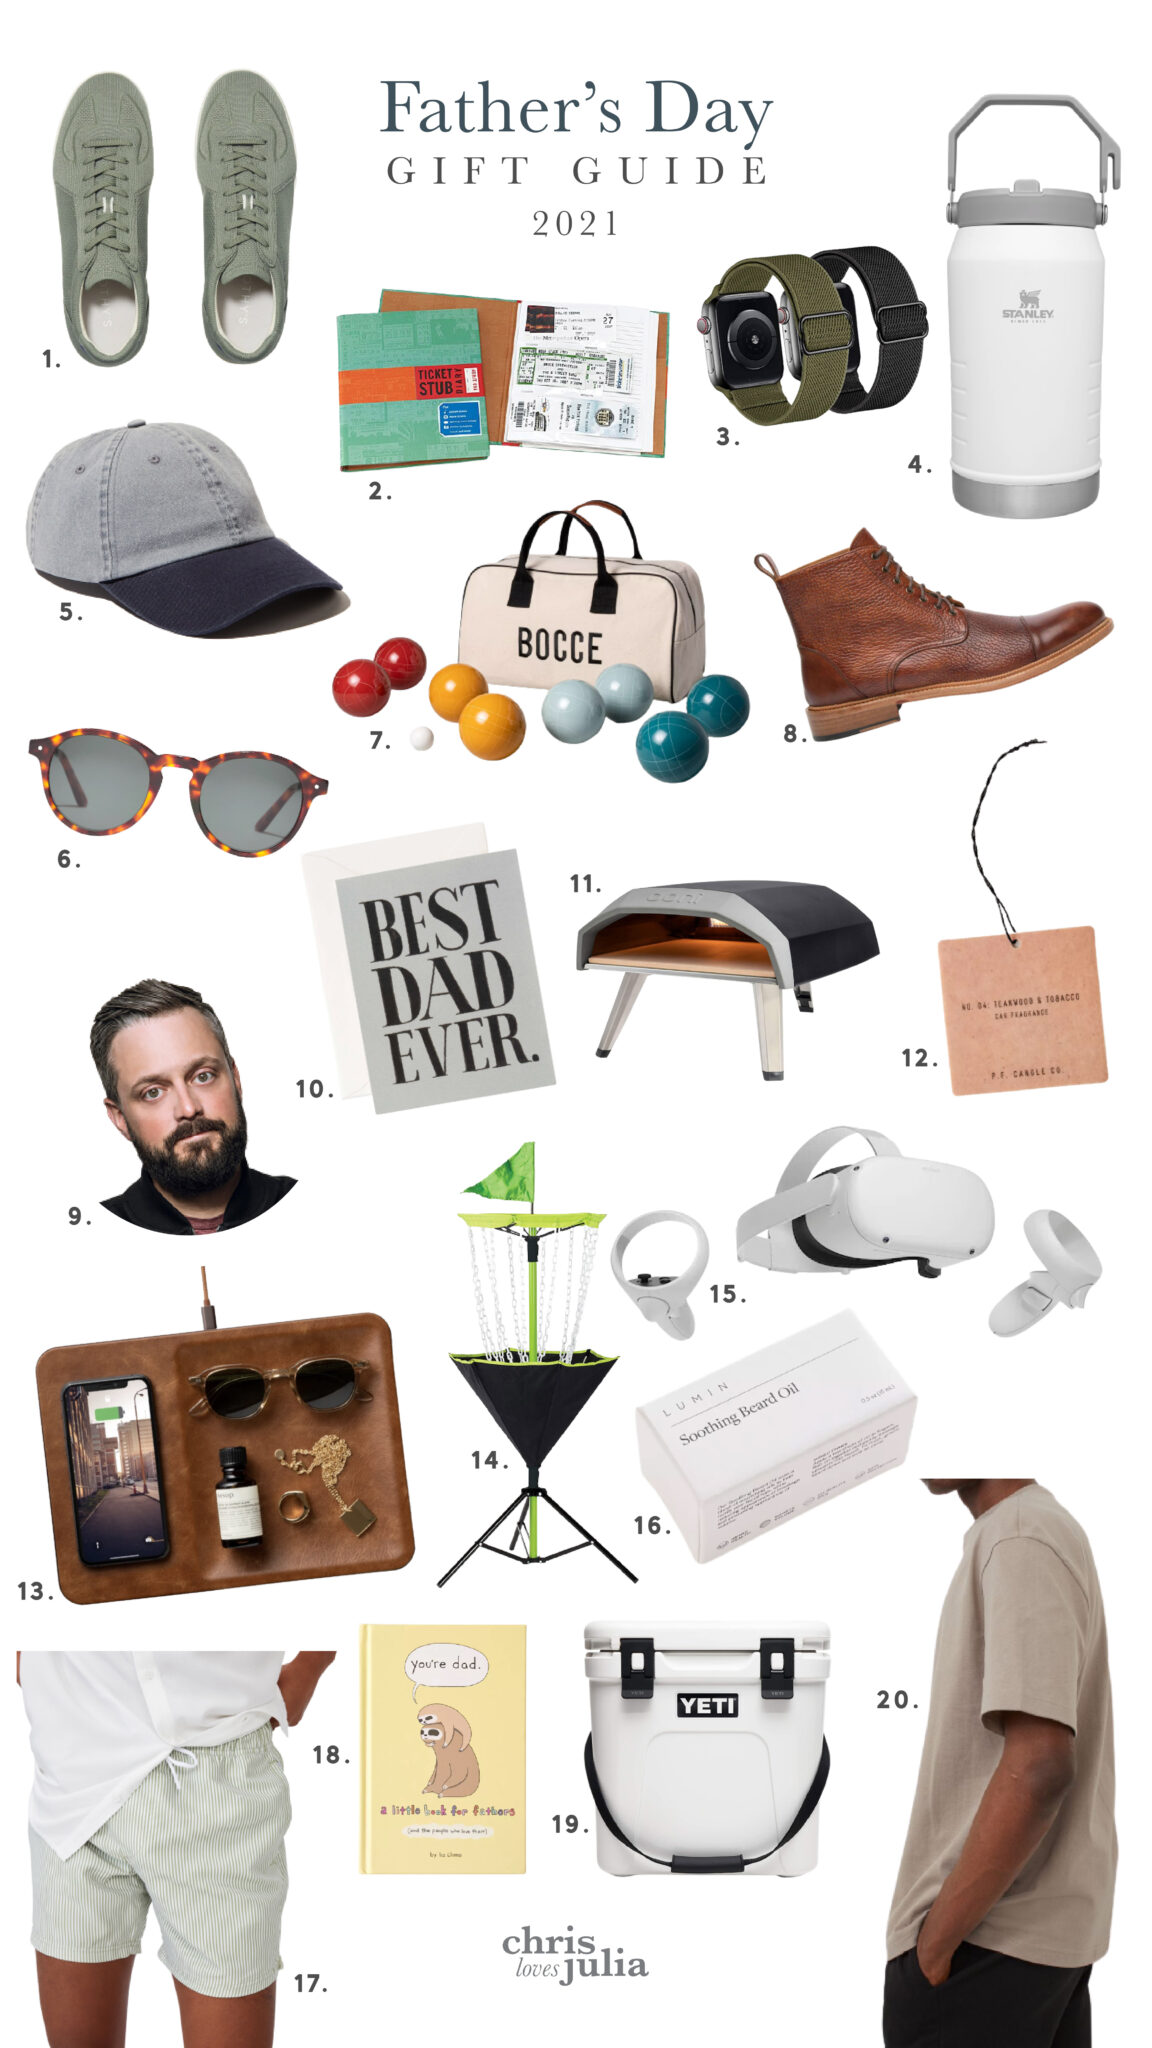 Top 5 Father's Day Gifts For Any Boater [2020 Gift Guide]